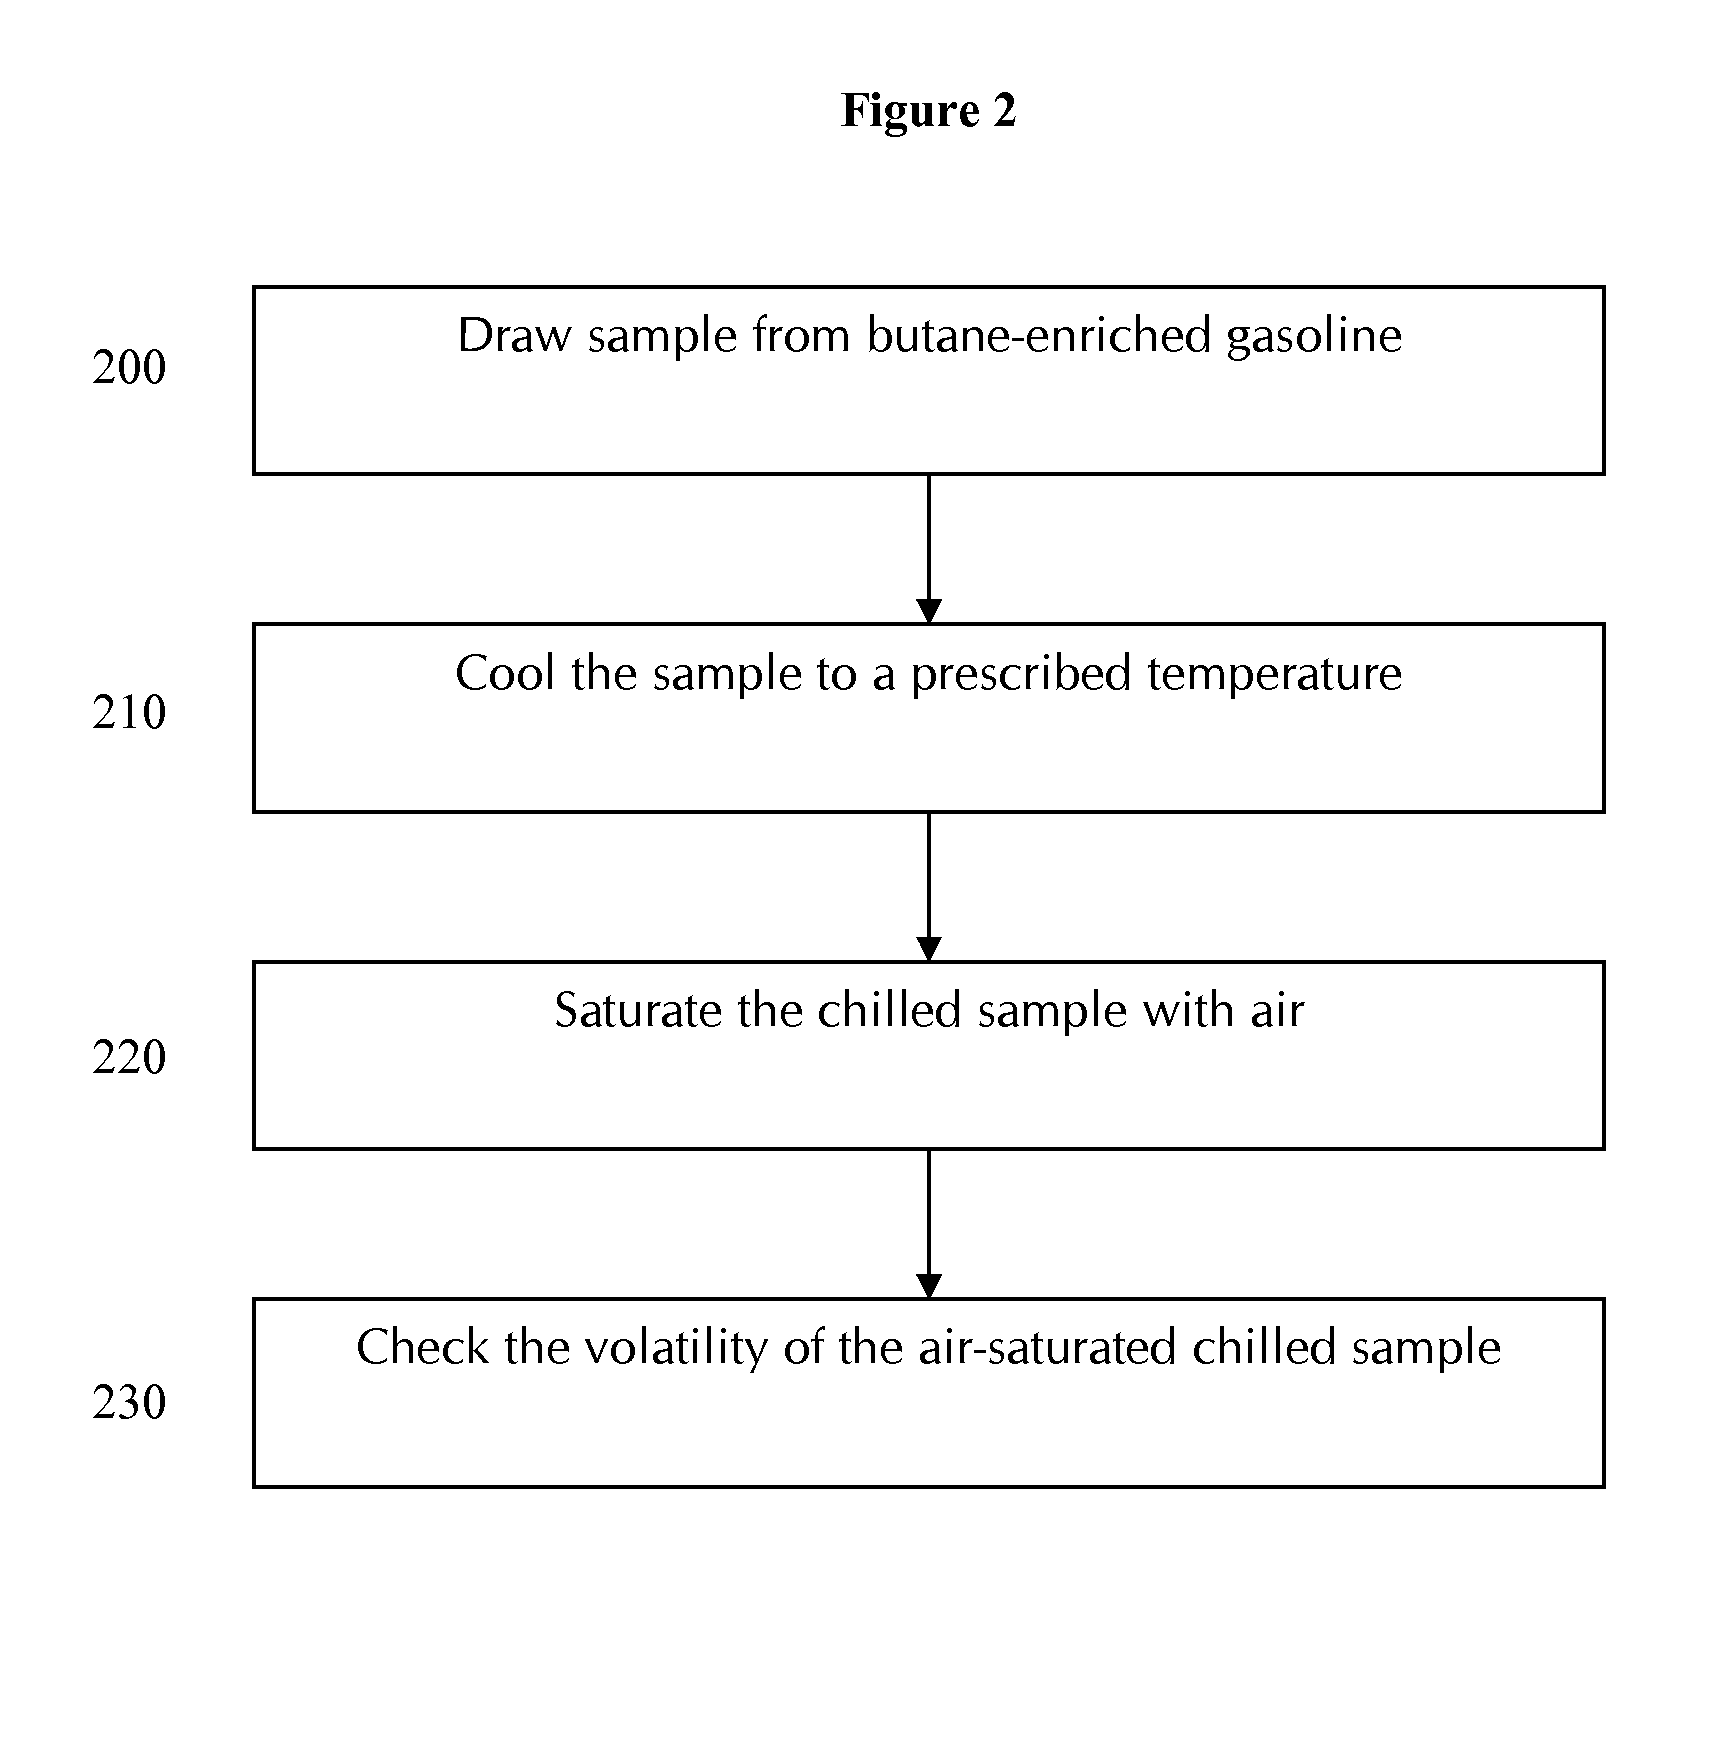 Methods for making and distributing batches of butane-enriched gasoline